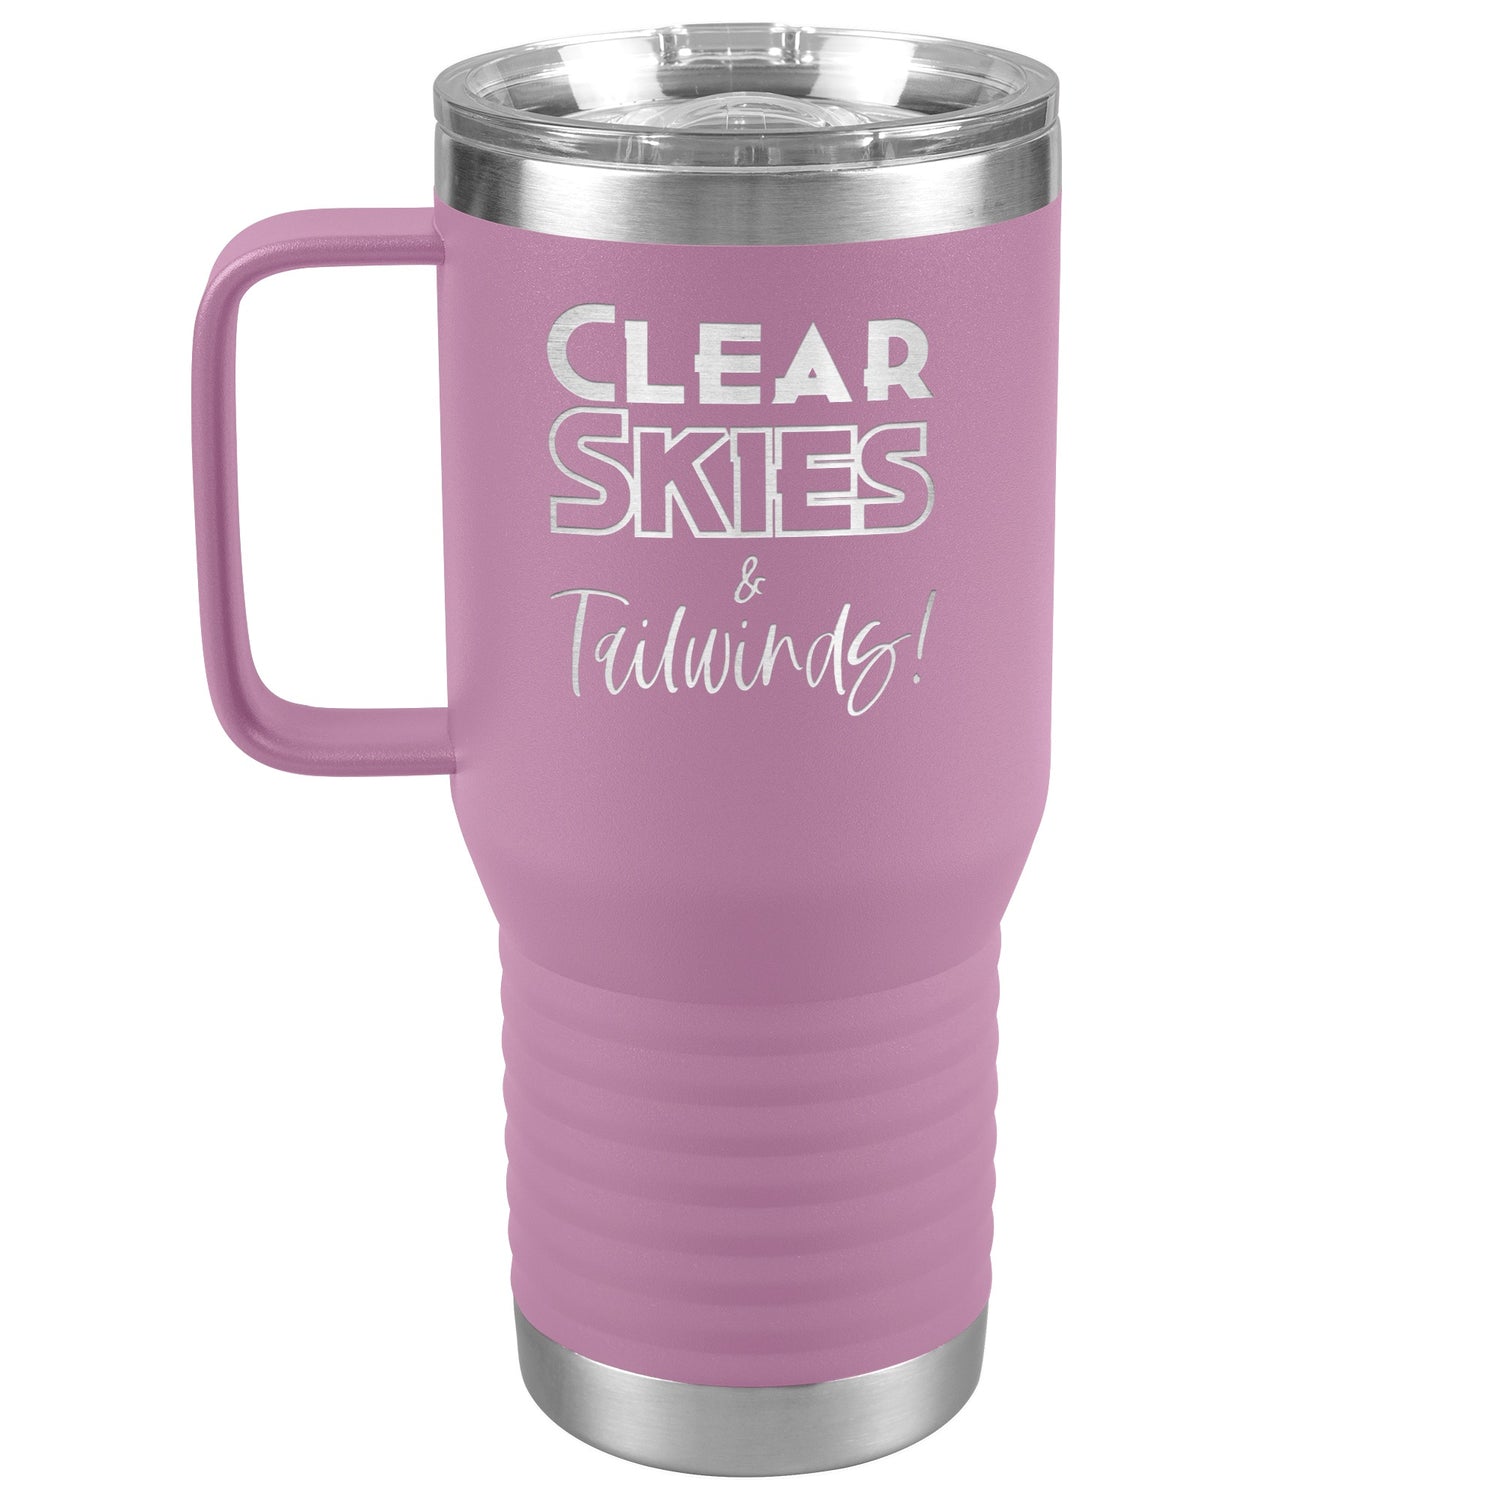 Clear skies & tail winds - 20 oz. travel tumbler